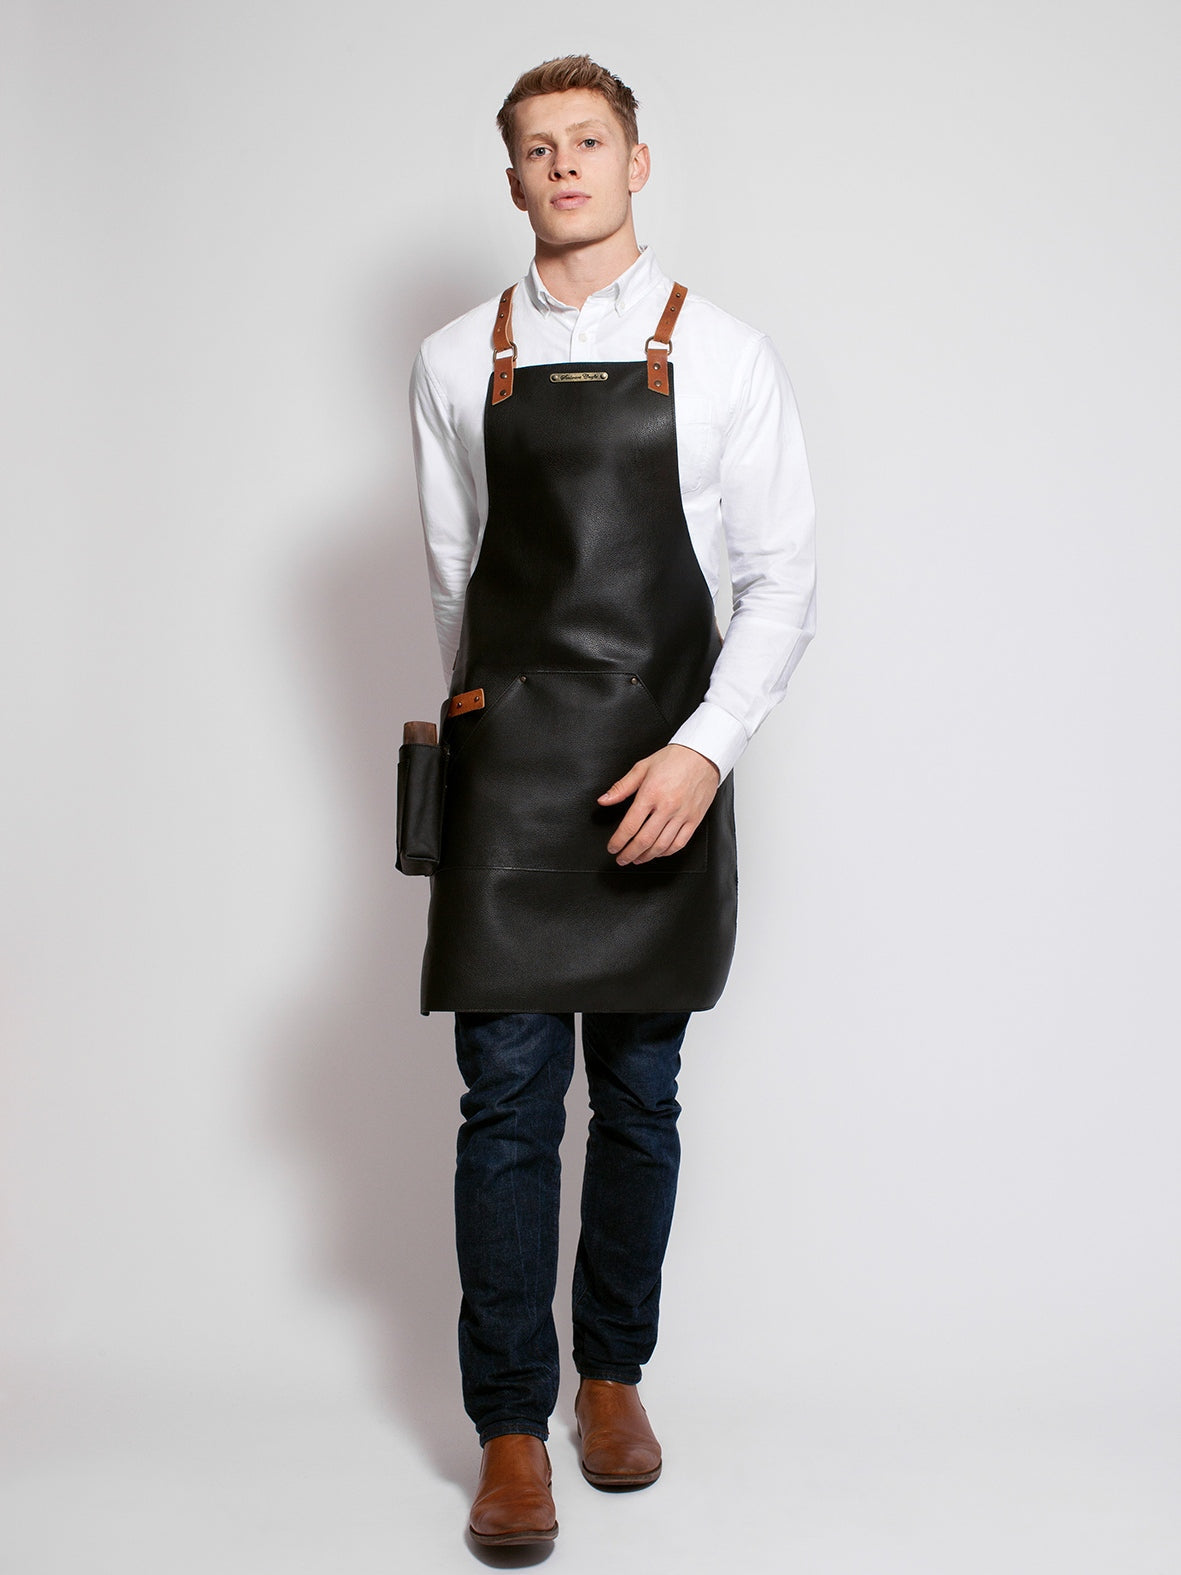 Leather Apron Cross Strap Deluxe Black by Stalwart -  ChefsCotton